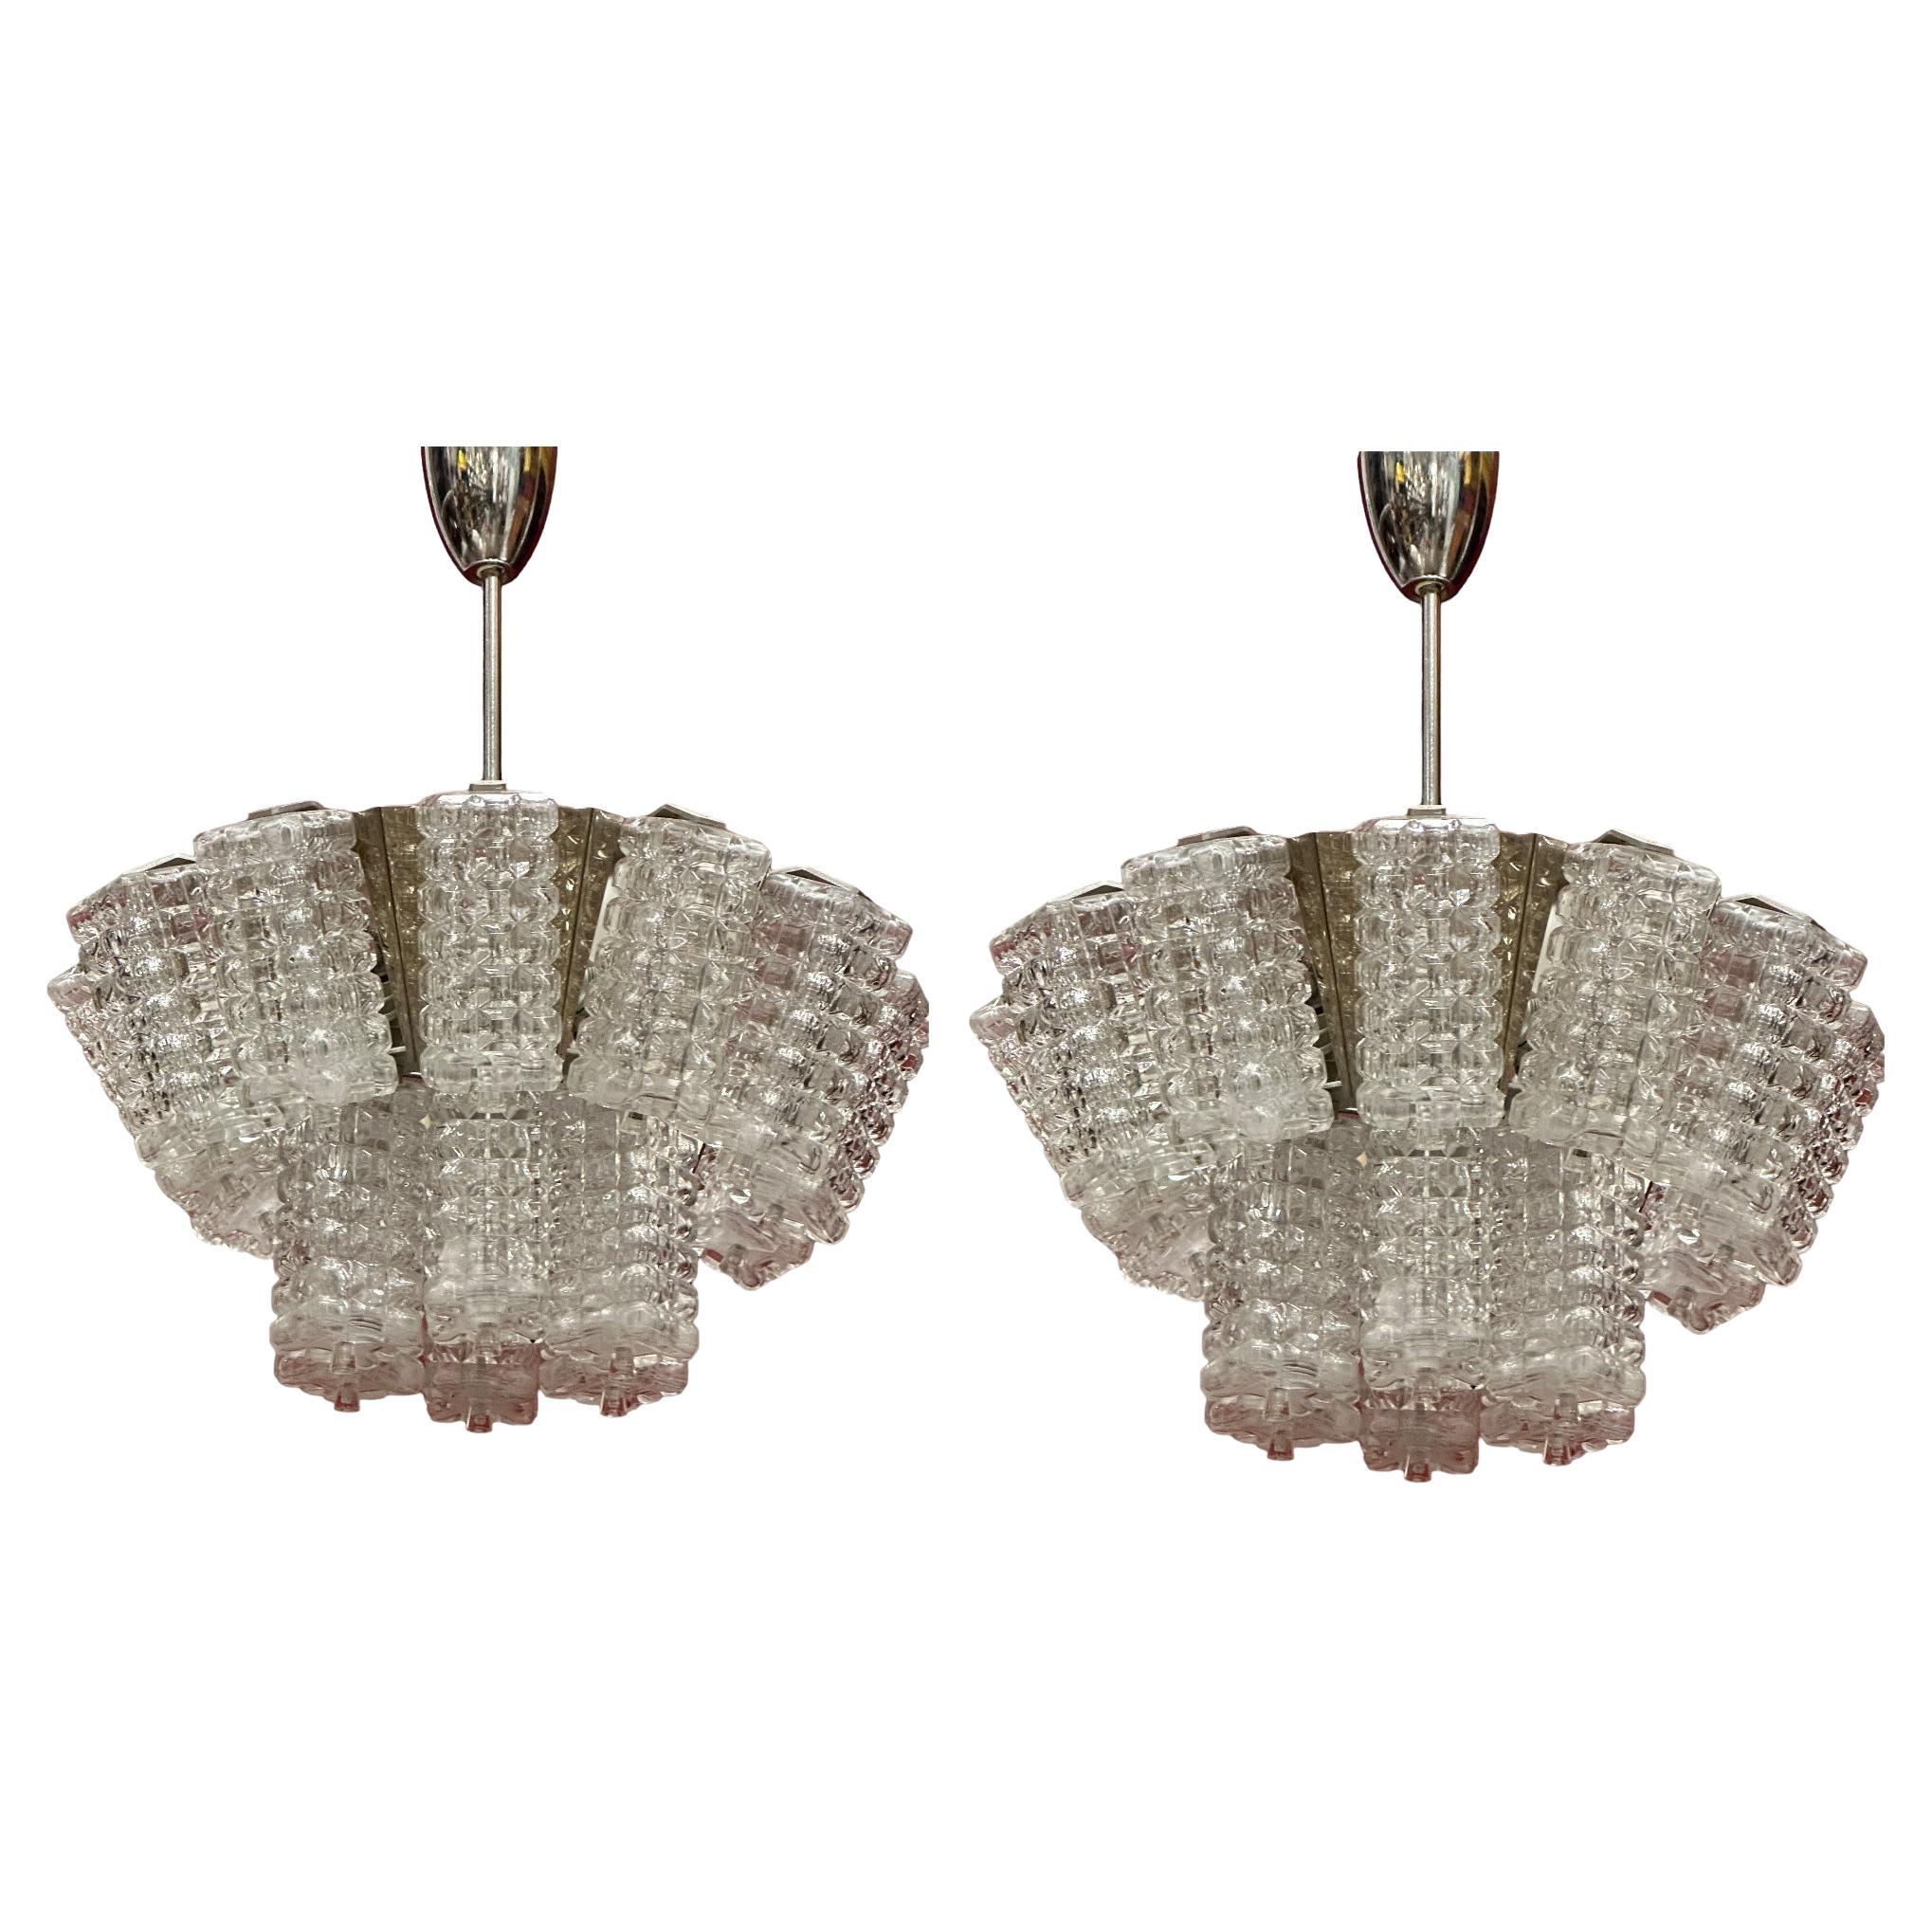 Pair of Two Tiered Glass Cube Chandelier by Austrolux, Austria, 1960s For Sale